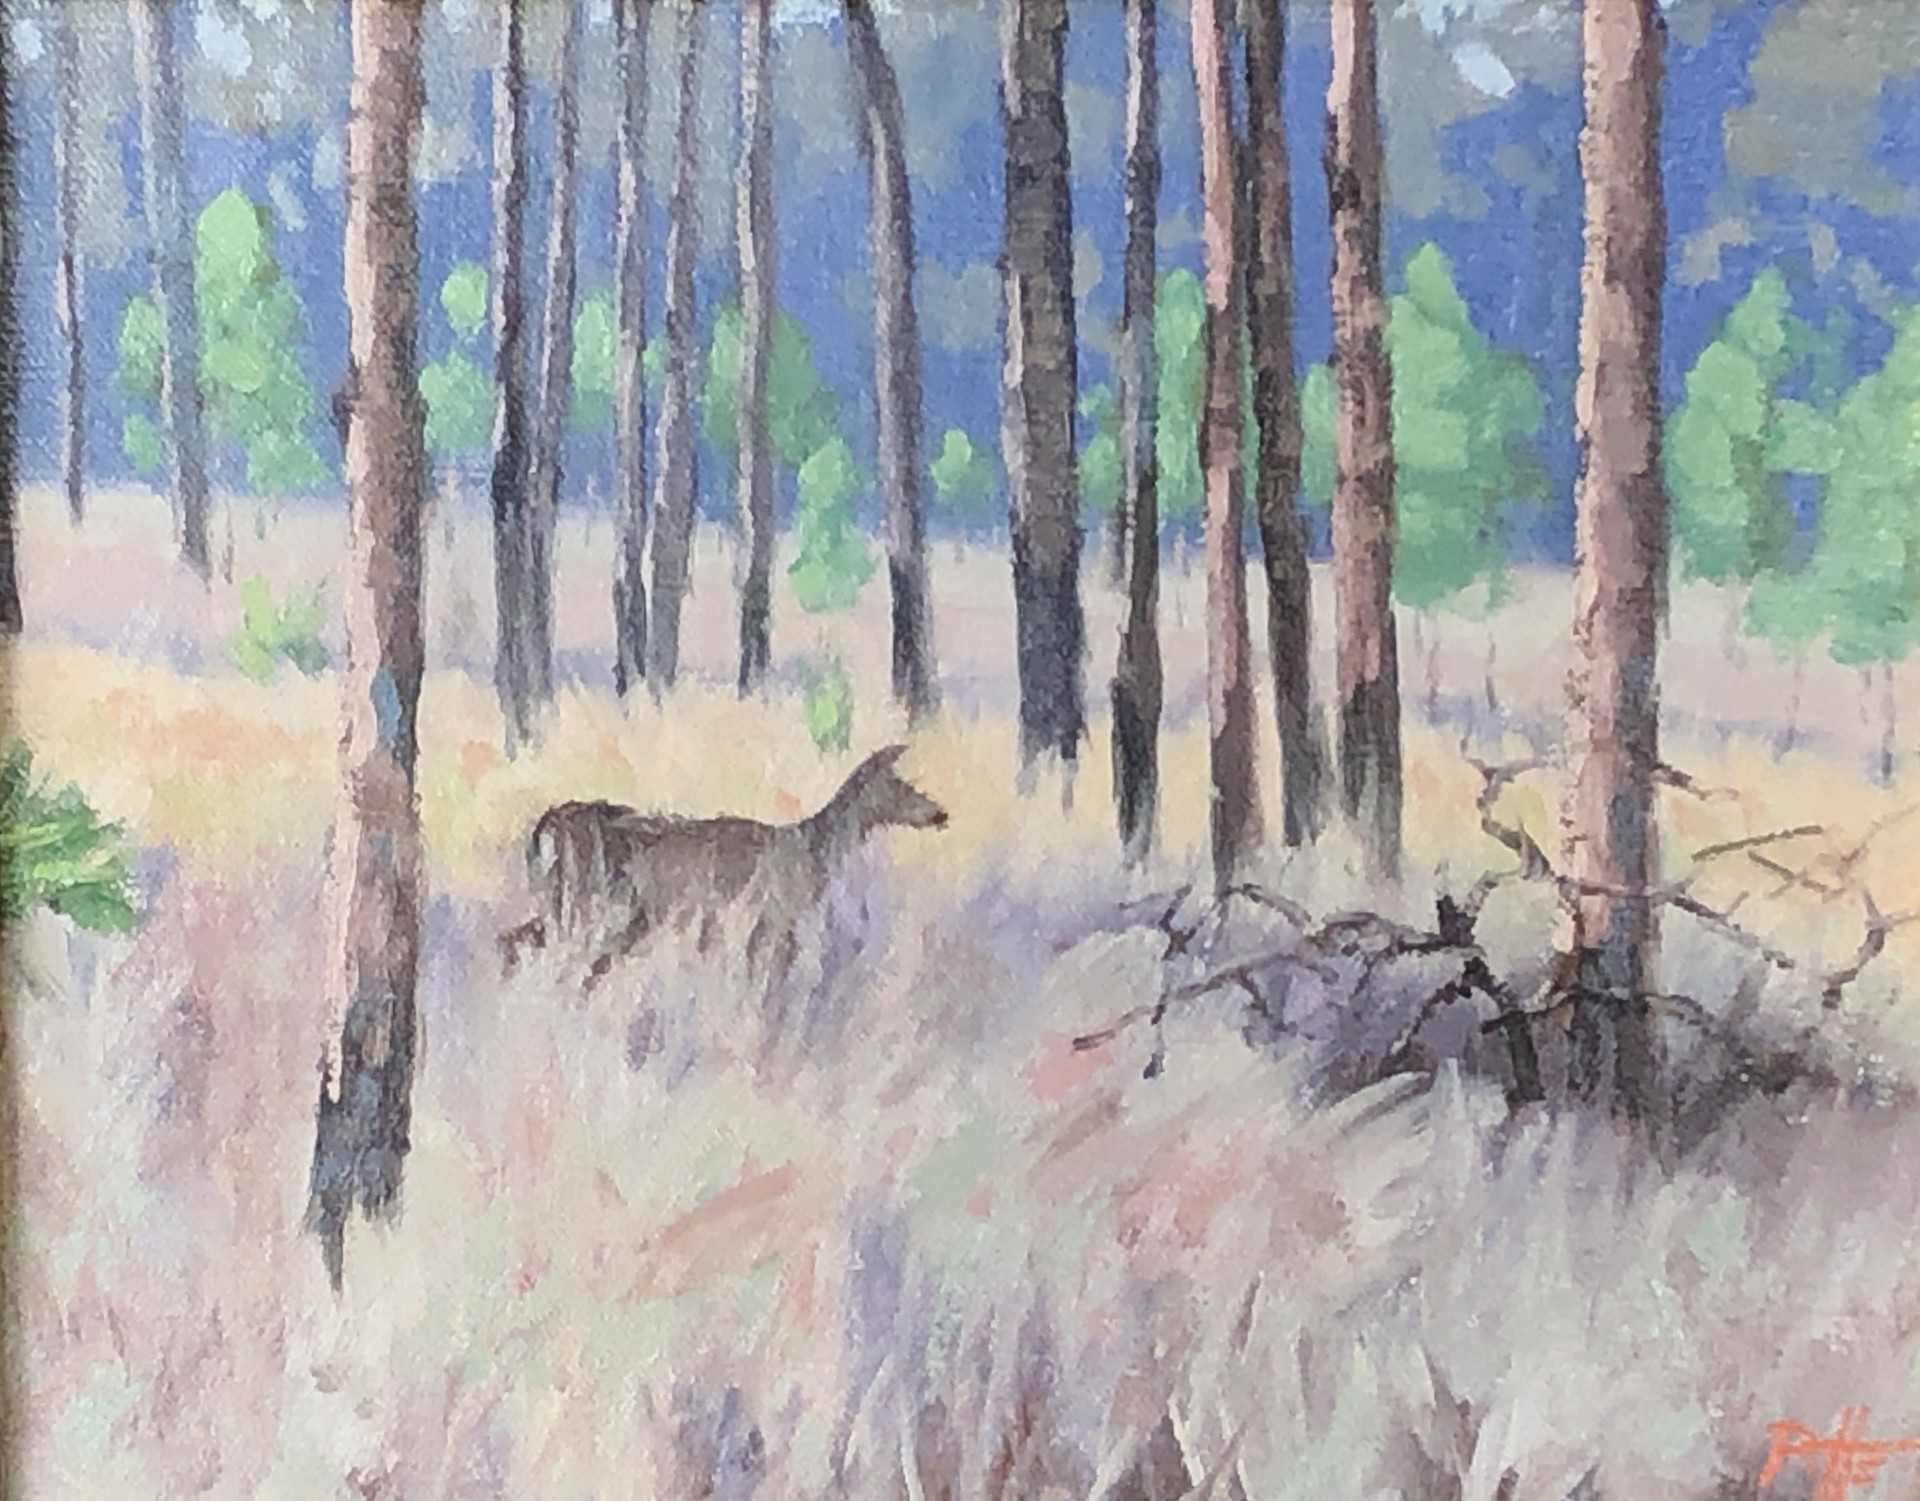 Deer Among the Pines by Randy Pitts